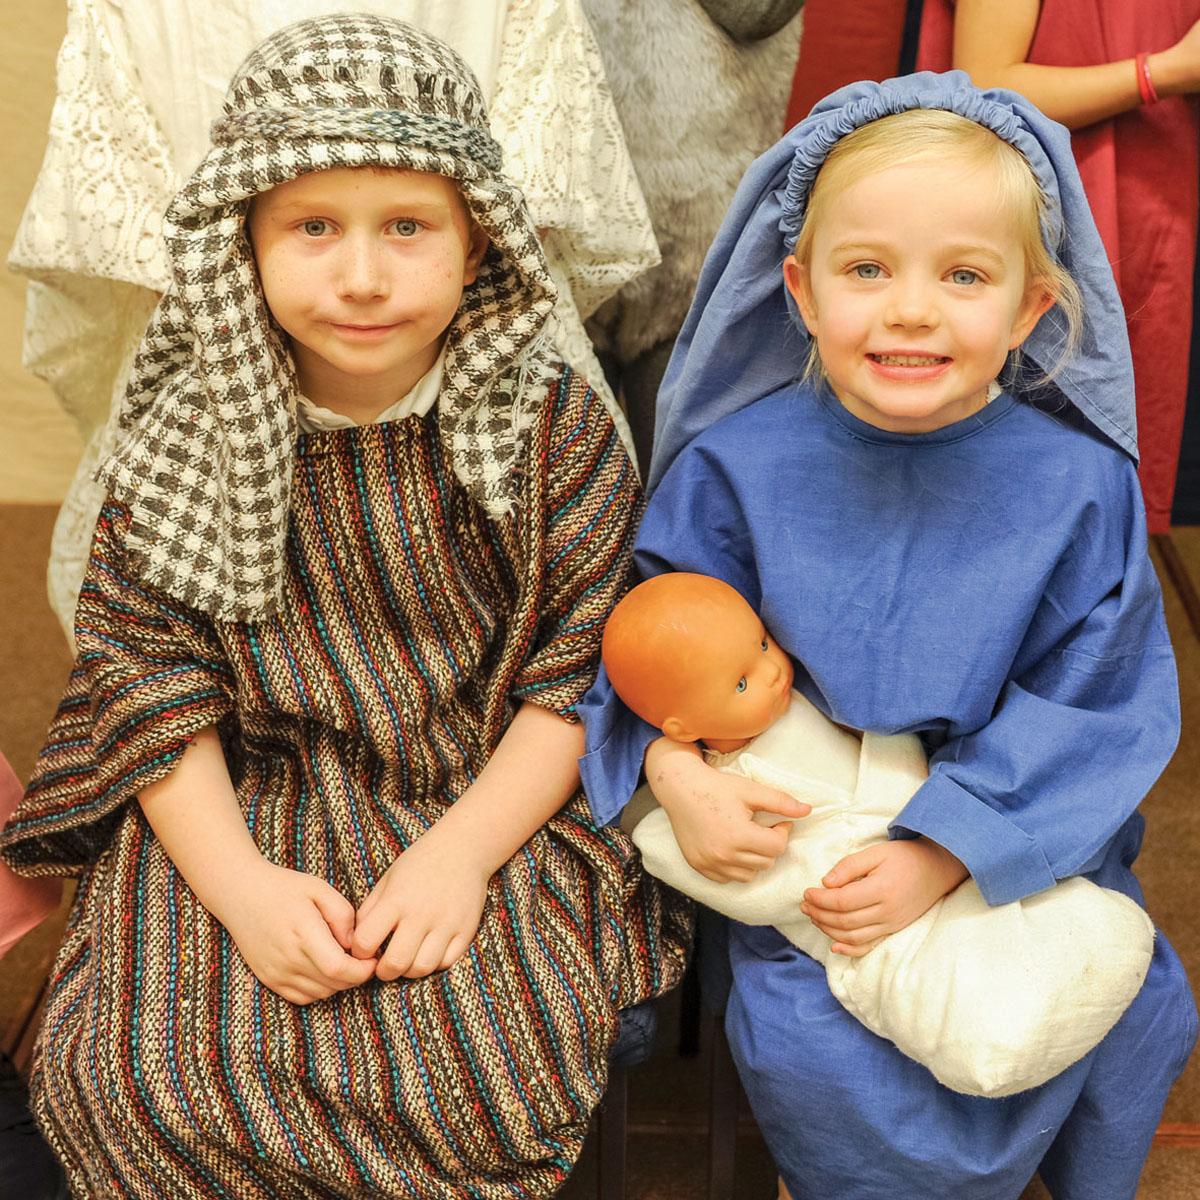 Christmas plays in and around Swindon
Brookfield Primary School
